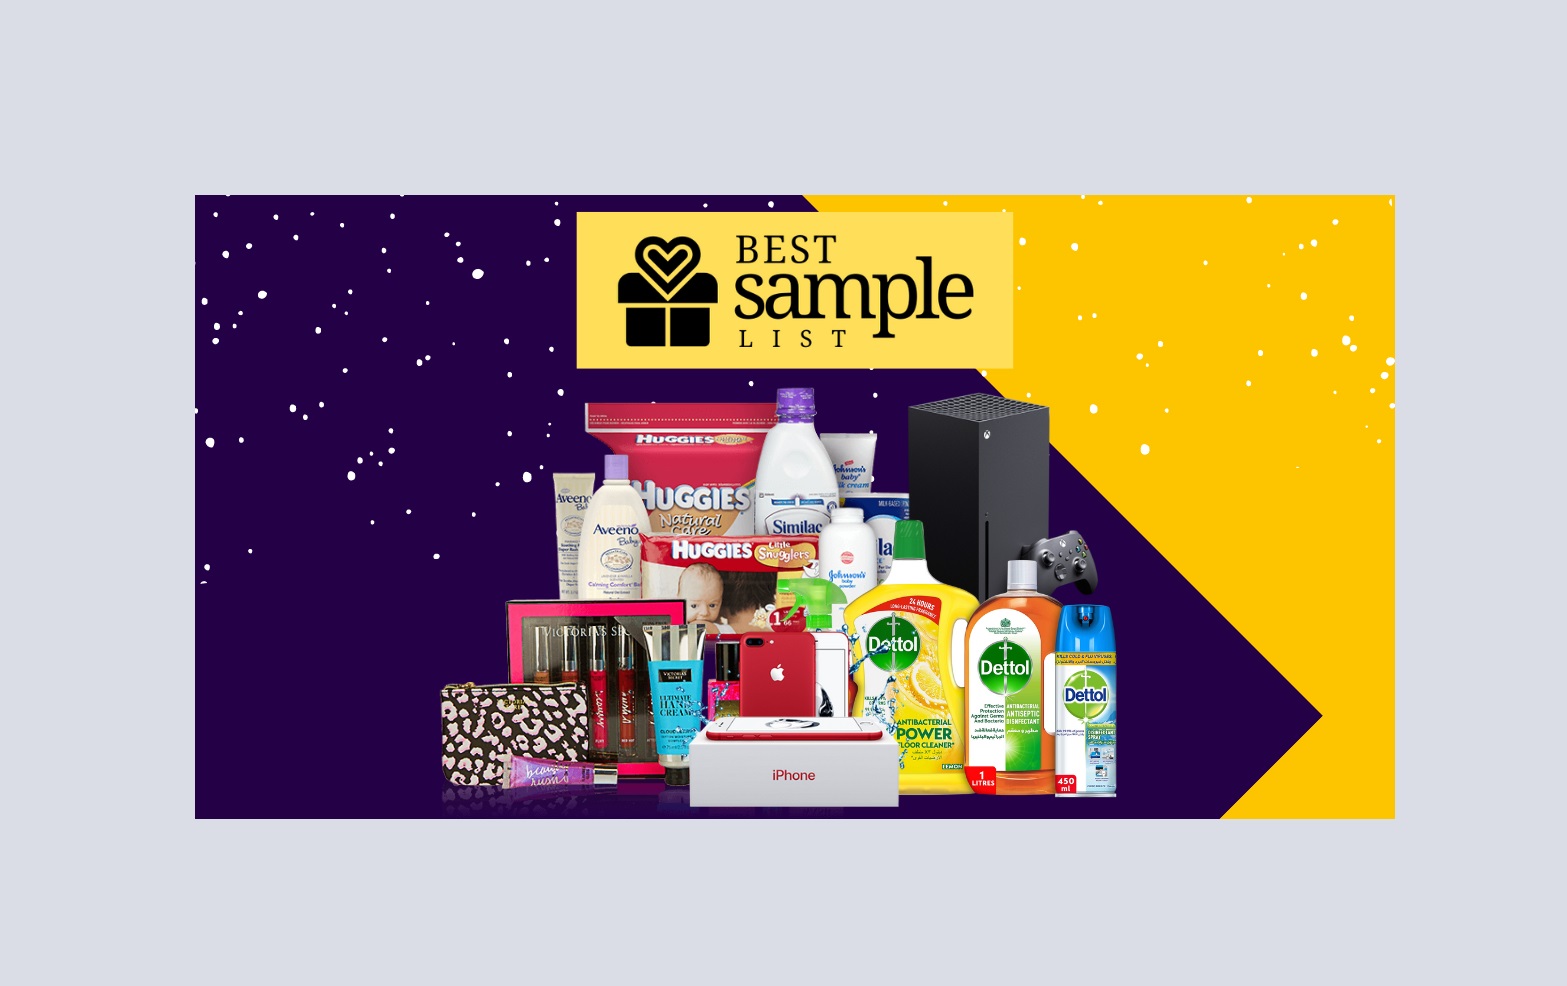 Discover a World of Free Samples and Exciting Freebies at BestSampleList.com!